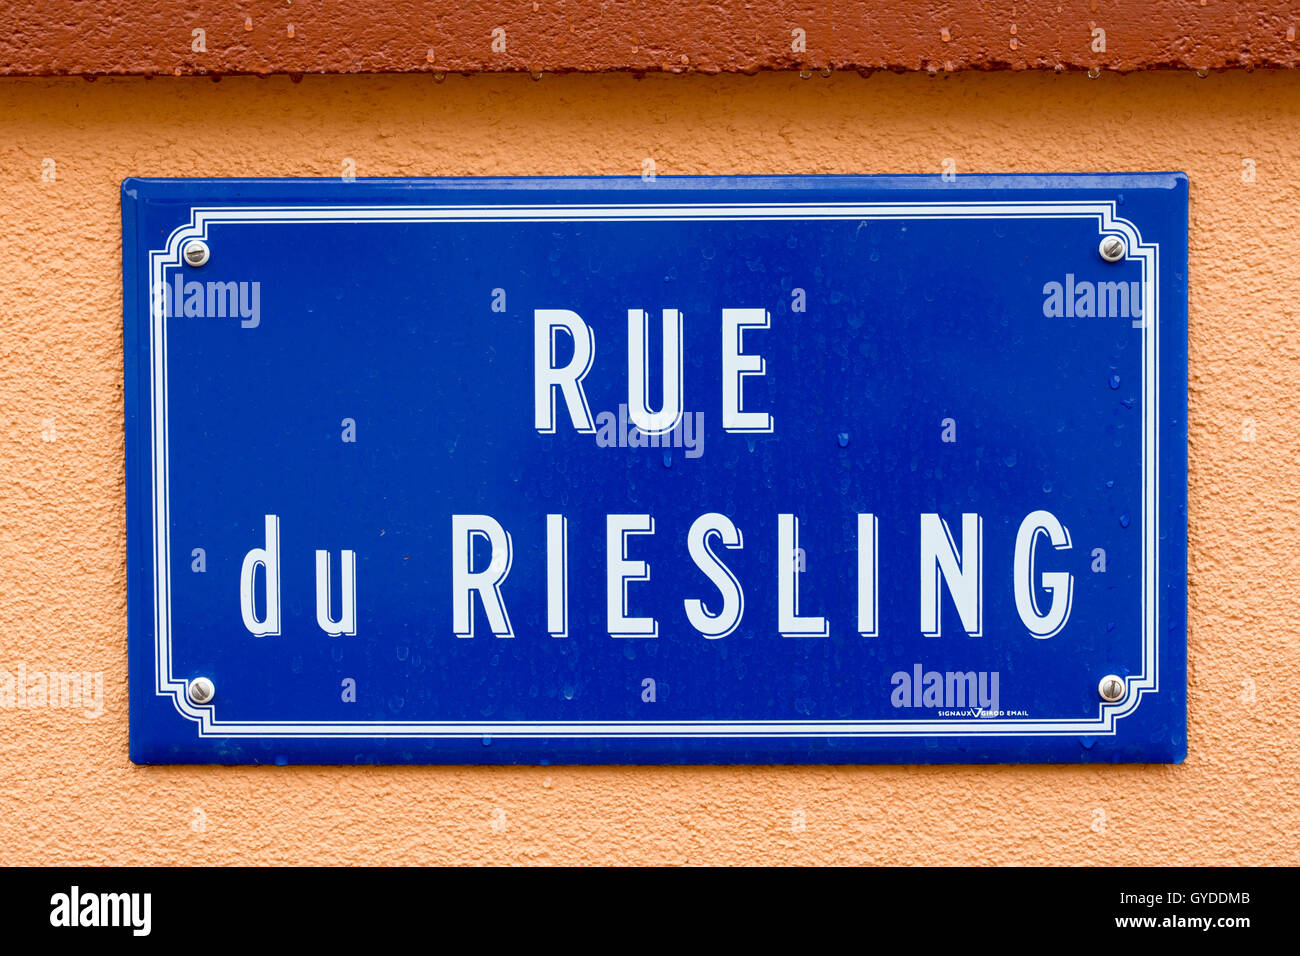 Road sign, Alsace, France Stock Photo